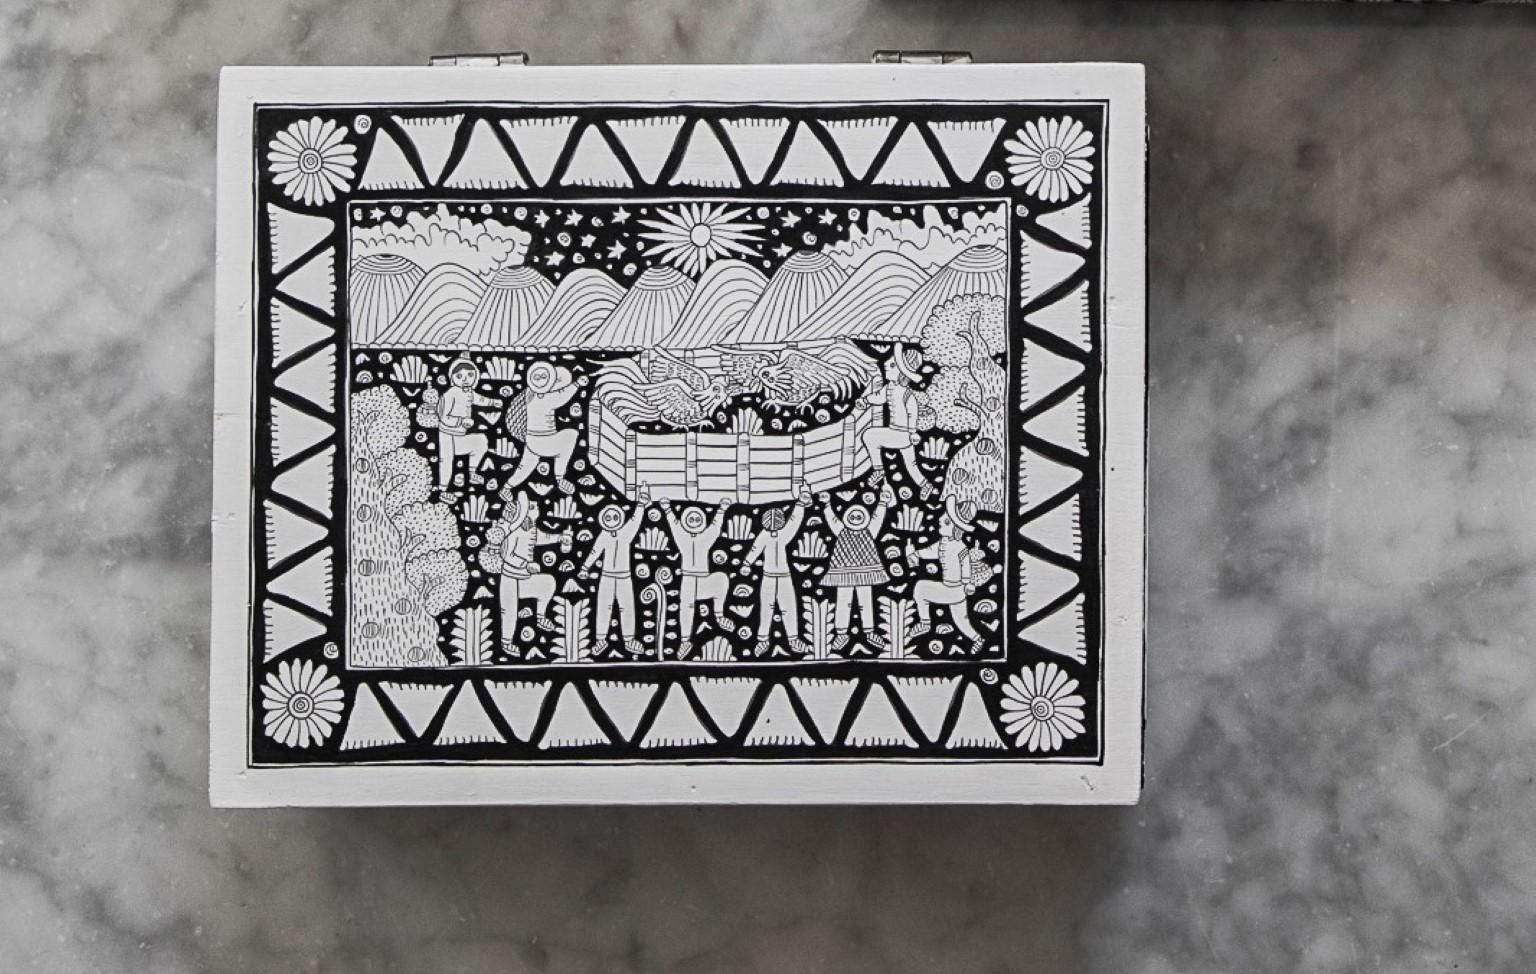 Xalitla box by Onora
Dimensions: 25 x 20 cm
Materials: Freehand painted wood

Hand painted tea box from Xalitla, Guerrero. The scenes painted on each piece portray everyday life in this region of Guerrero from agriculture and farming to